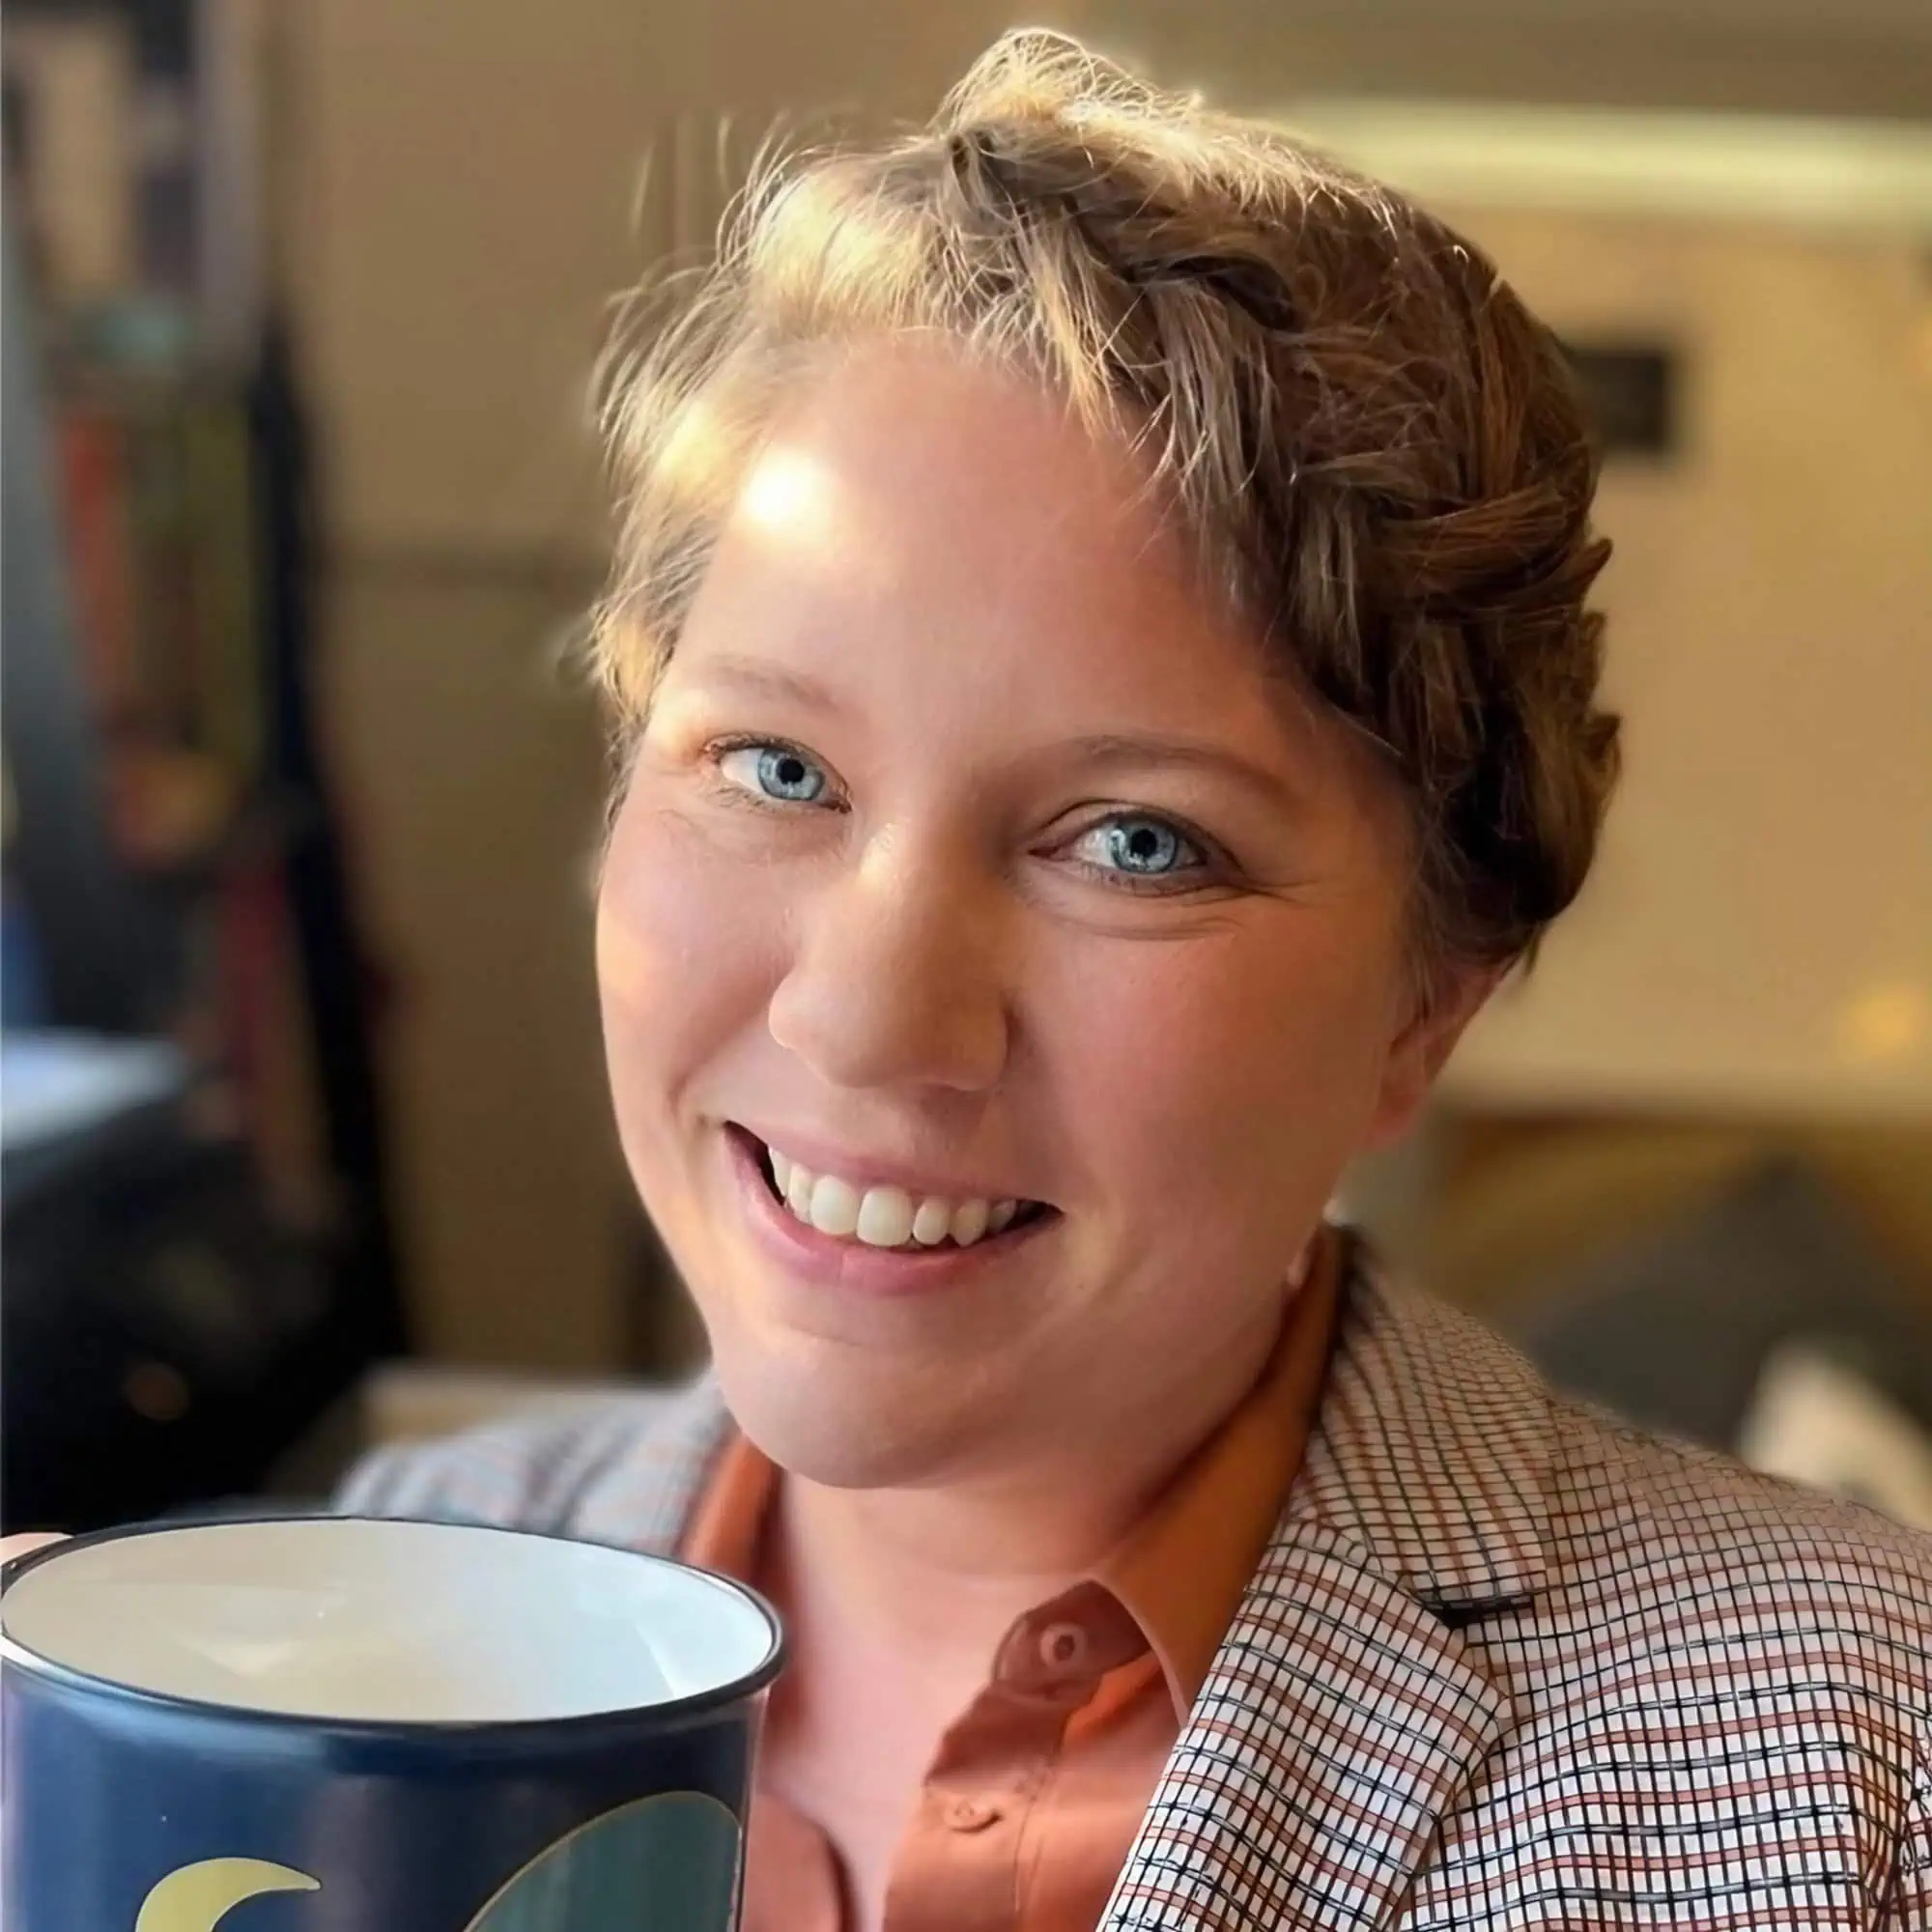 A person with short curly hair is smiling at the camera while holding a coffee mug. They are wearing a plaid blazer and an orange shirt, reminiscent of Margarey Valdez's signature style. The background appears to be an indoor setting with warm lighting. - Market Design Team: Define. Structure. Expand.